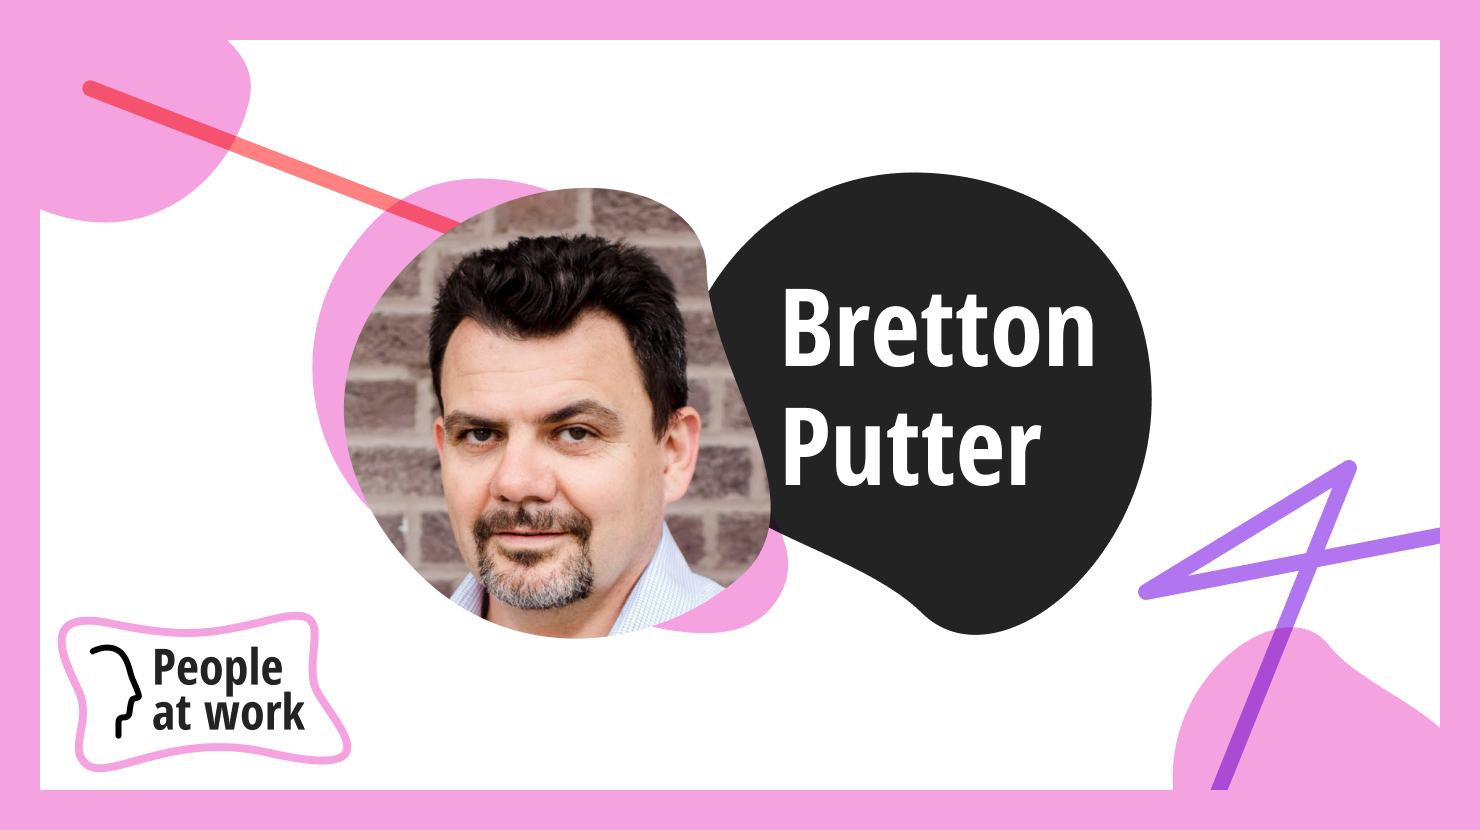 Implicit agreements are how you communicate your culture says Bretton Putter